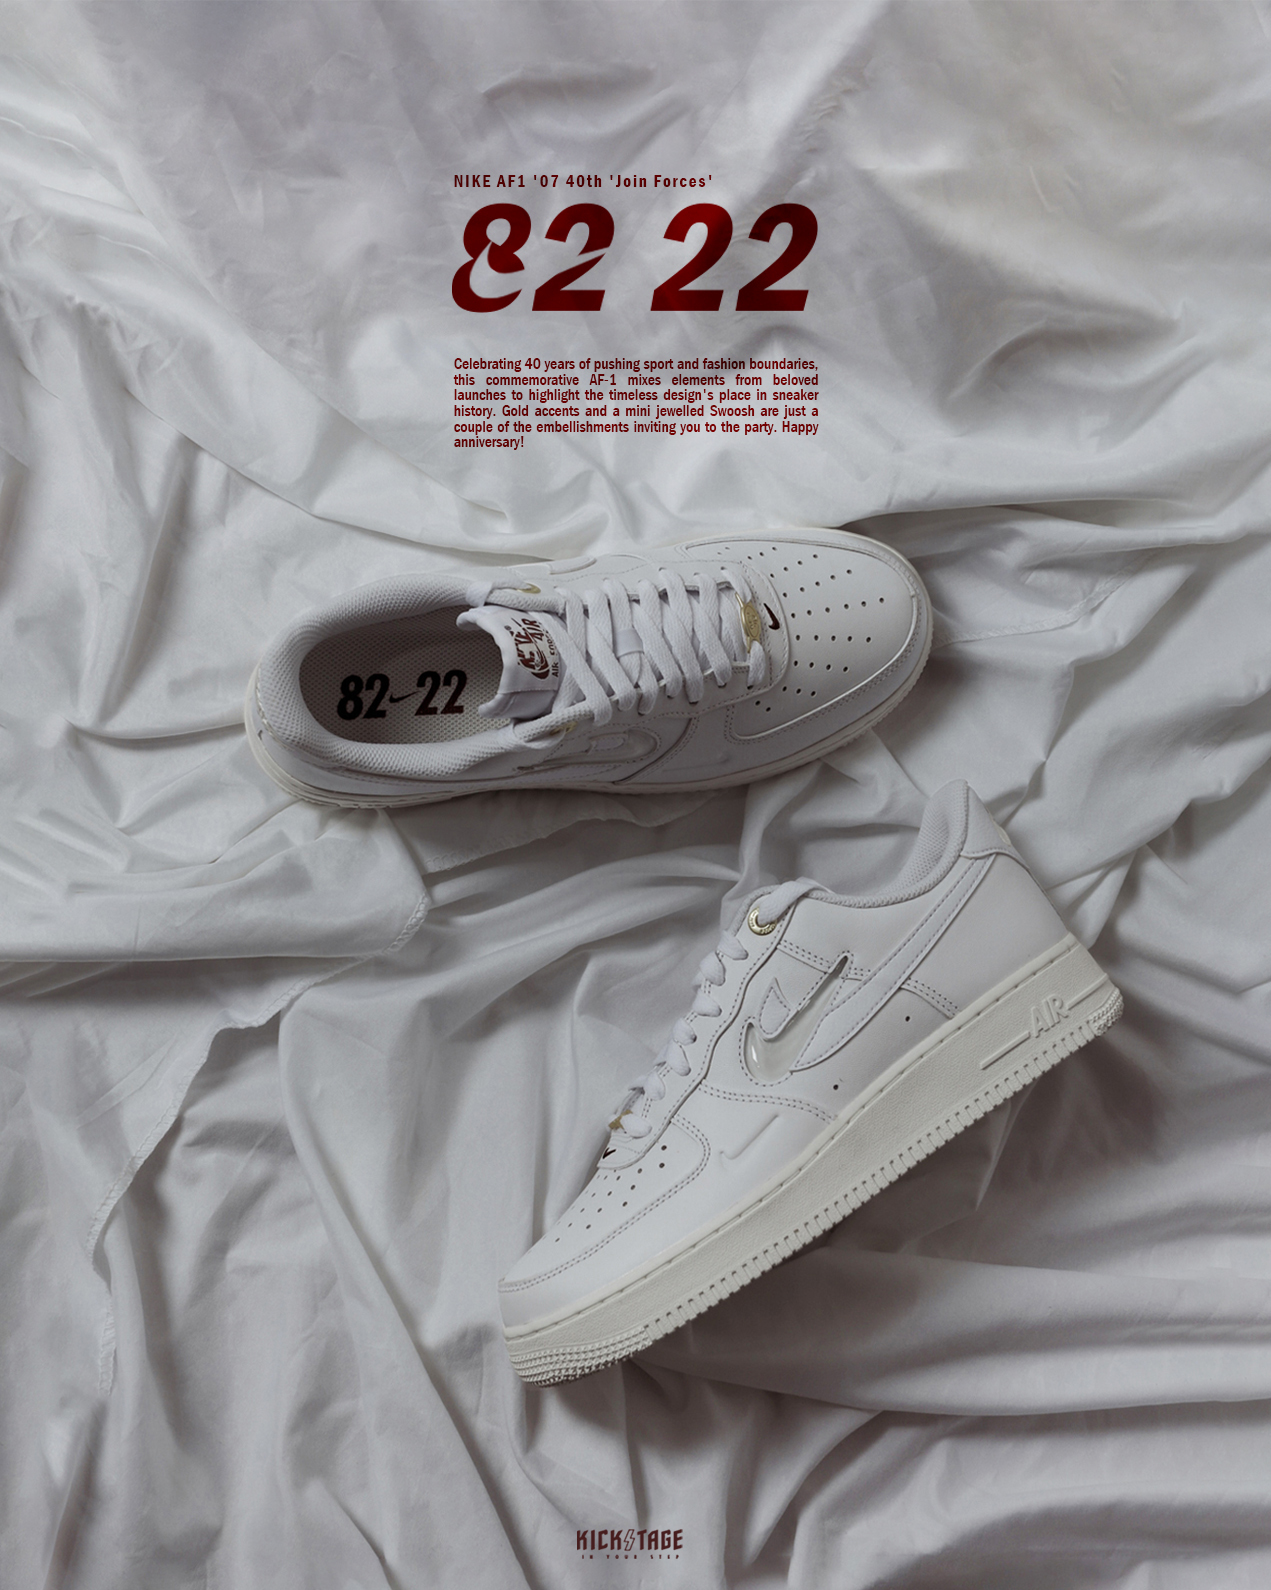 NIKE AIR FORCE 1 JOIN FORCES 全白果凍小勾白金鐵牌休閒鞋【DQ7664-100